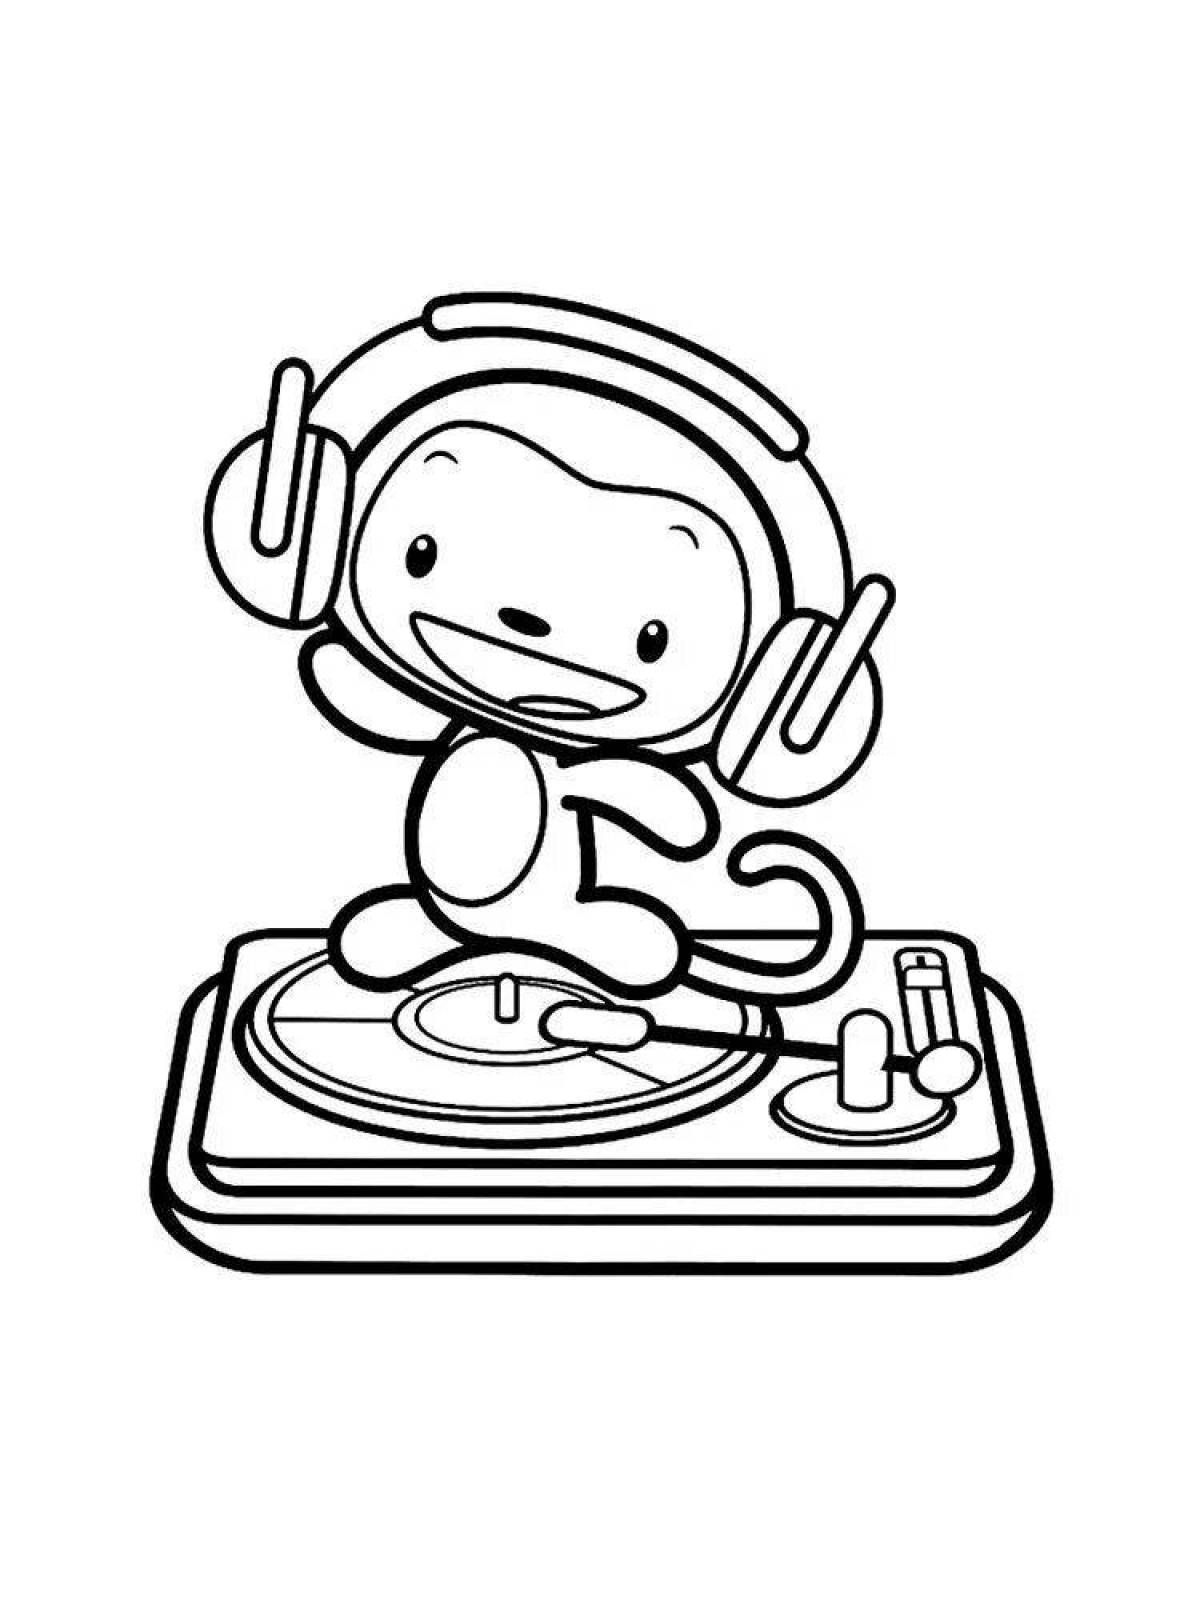 Coloring page funny dj